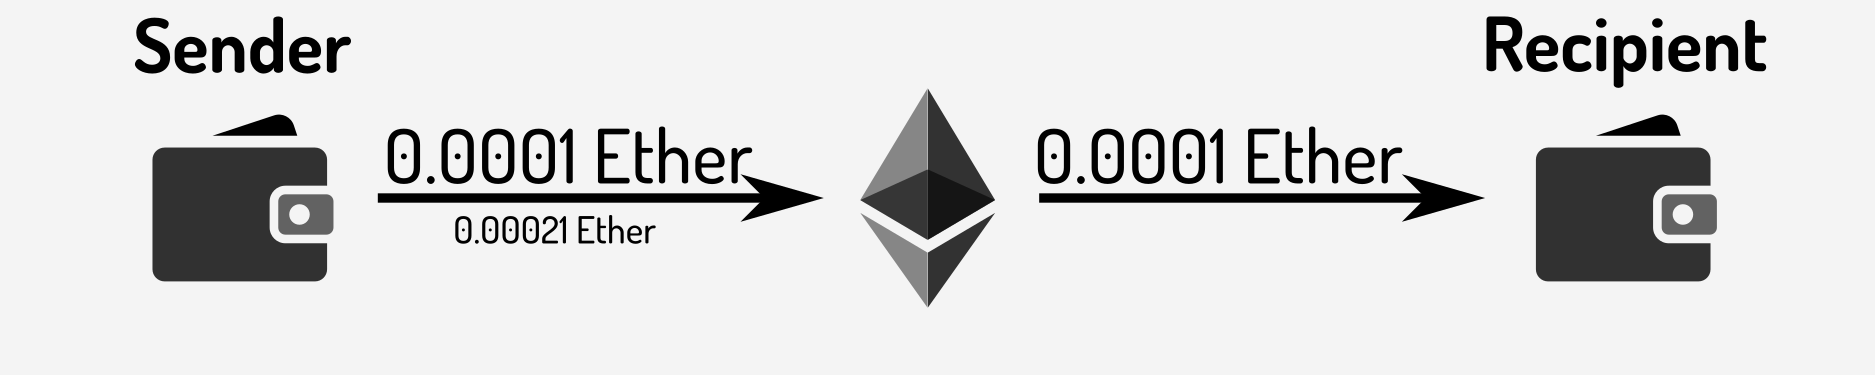 A small Ethereum payment